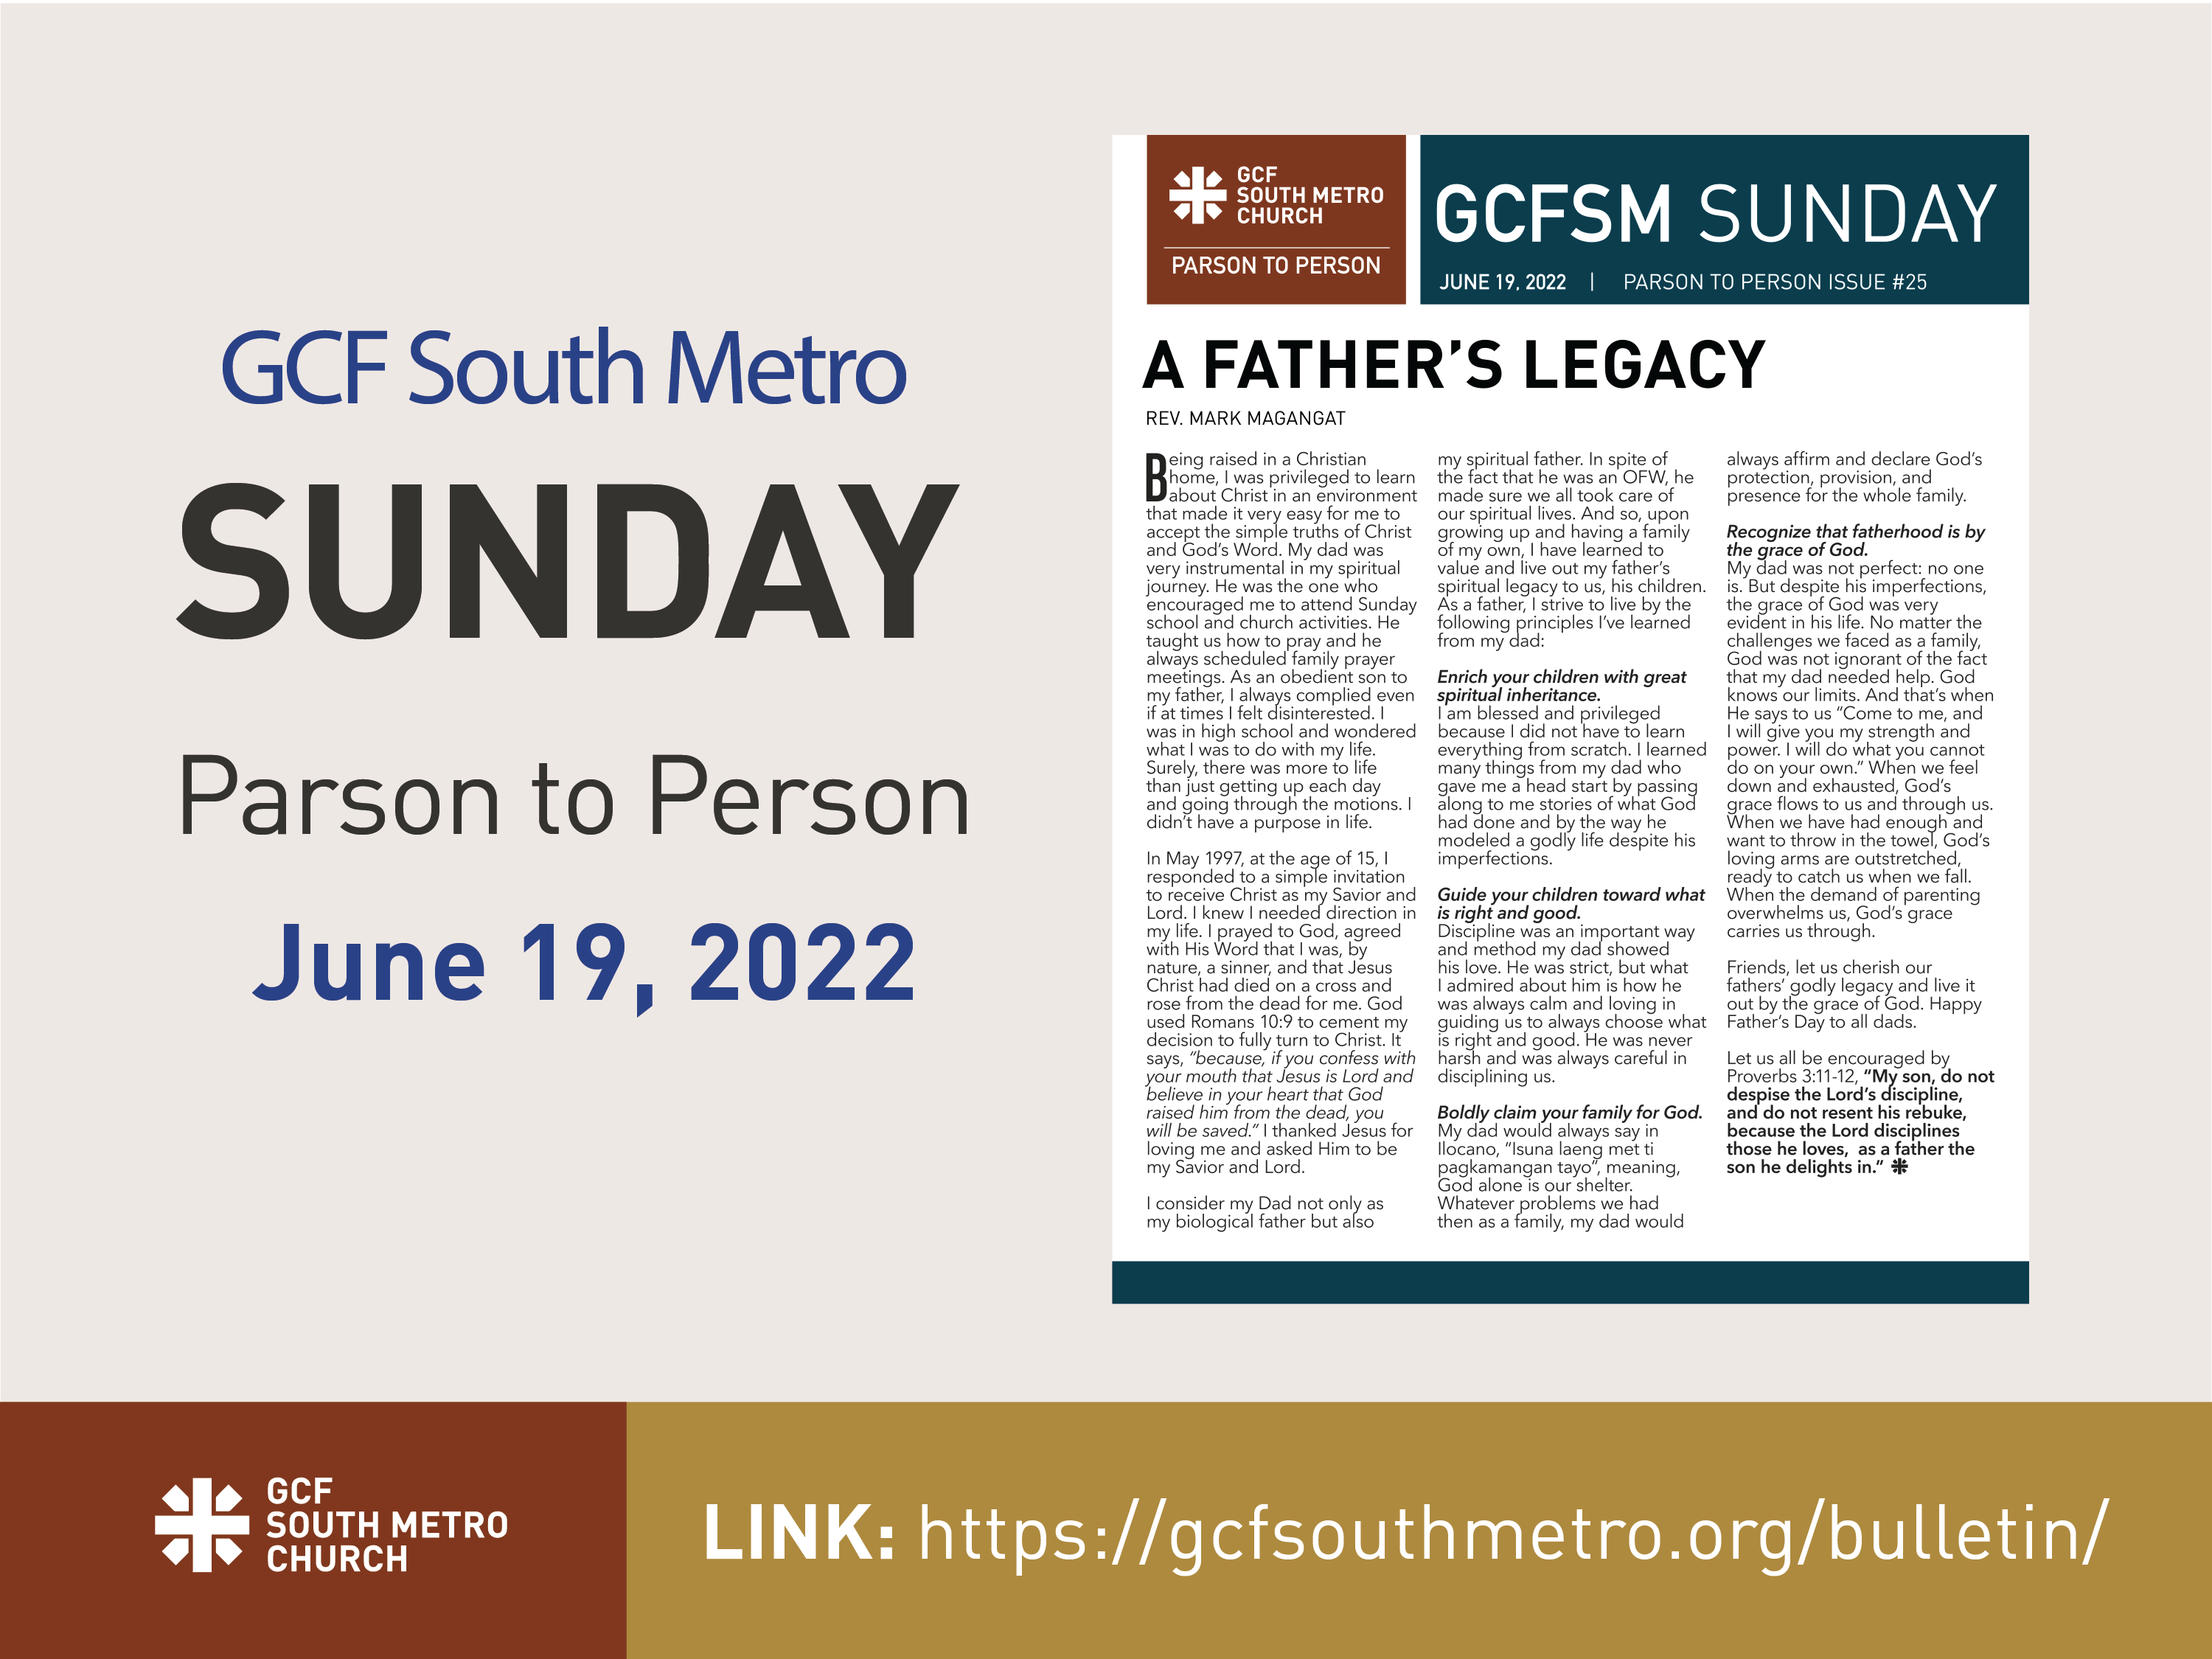 Sunday Bulletin – Parson to Person, June 19, 2022